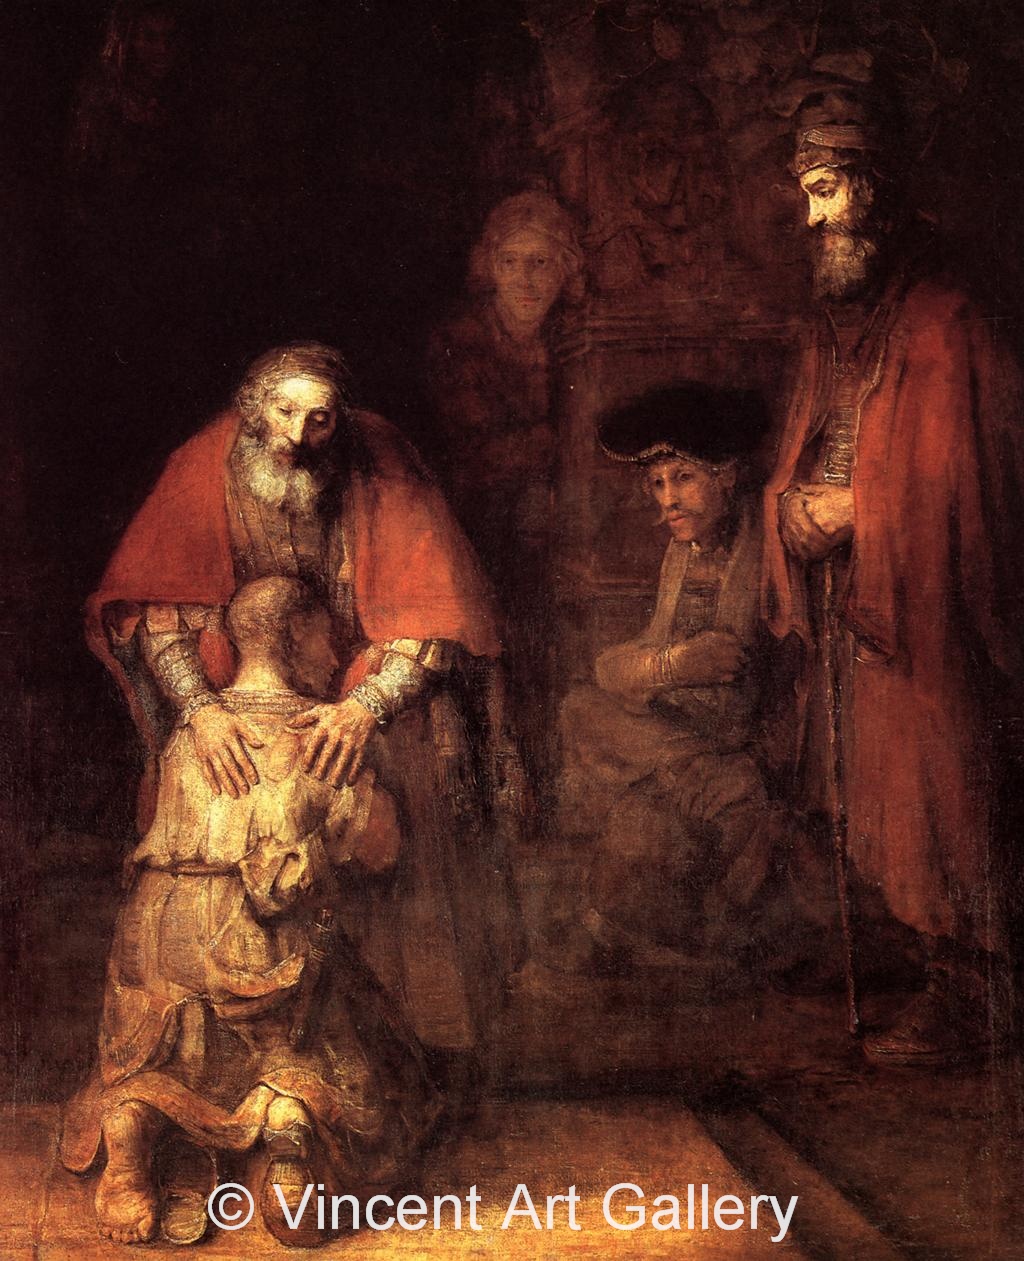 A740, REMBRANDT, Return of the Prodigal Son